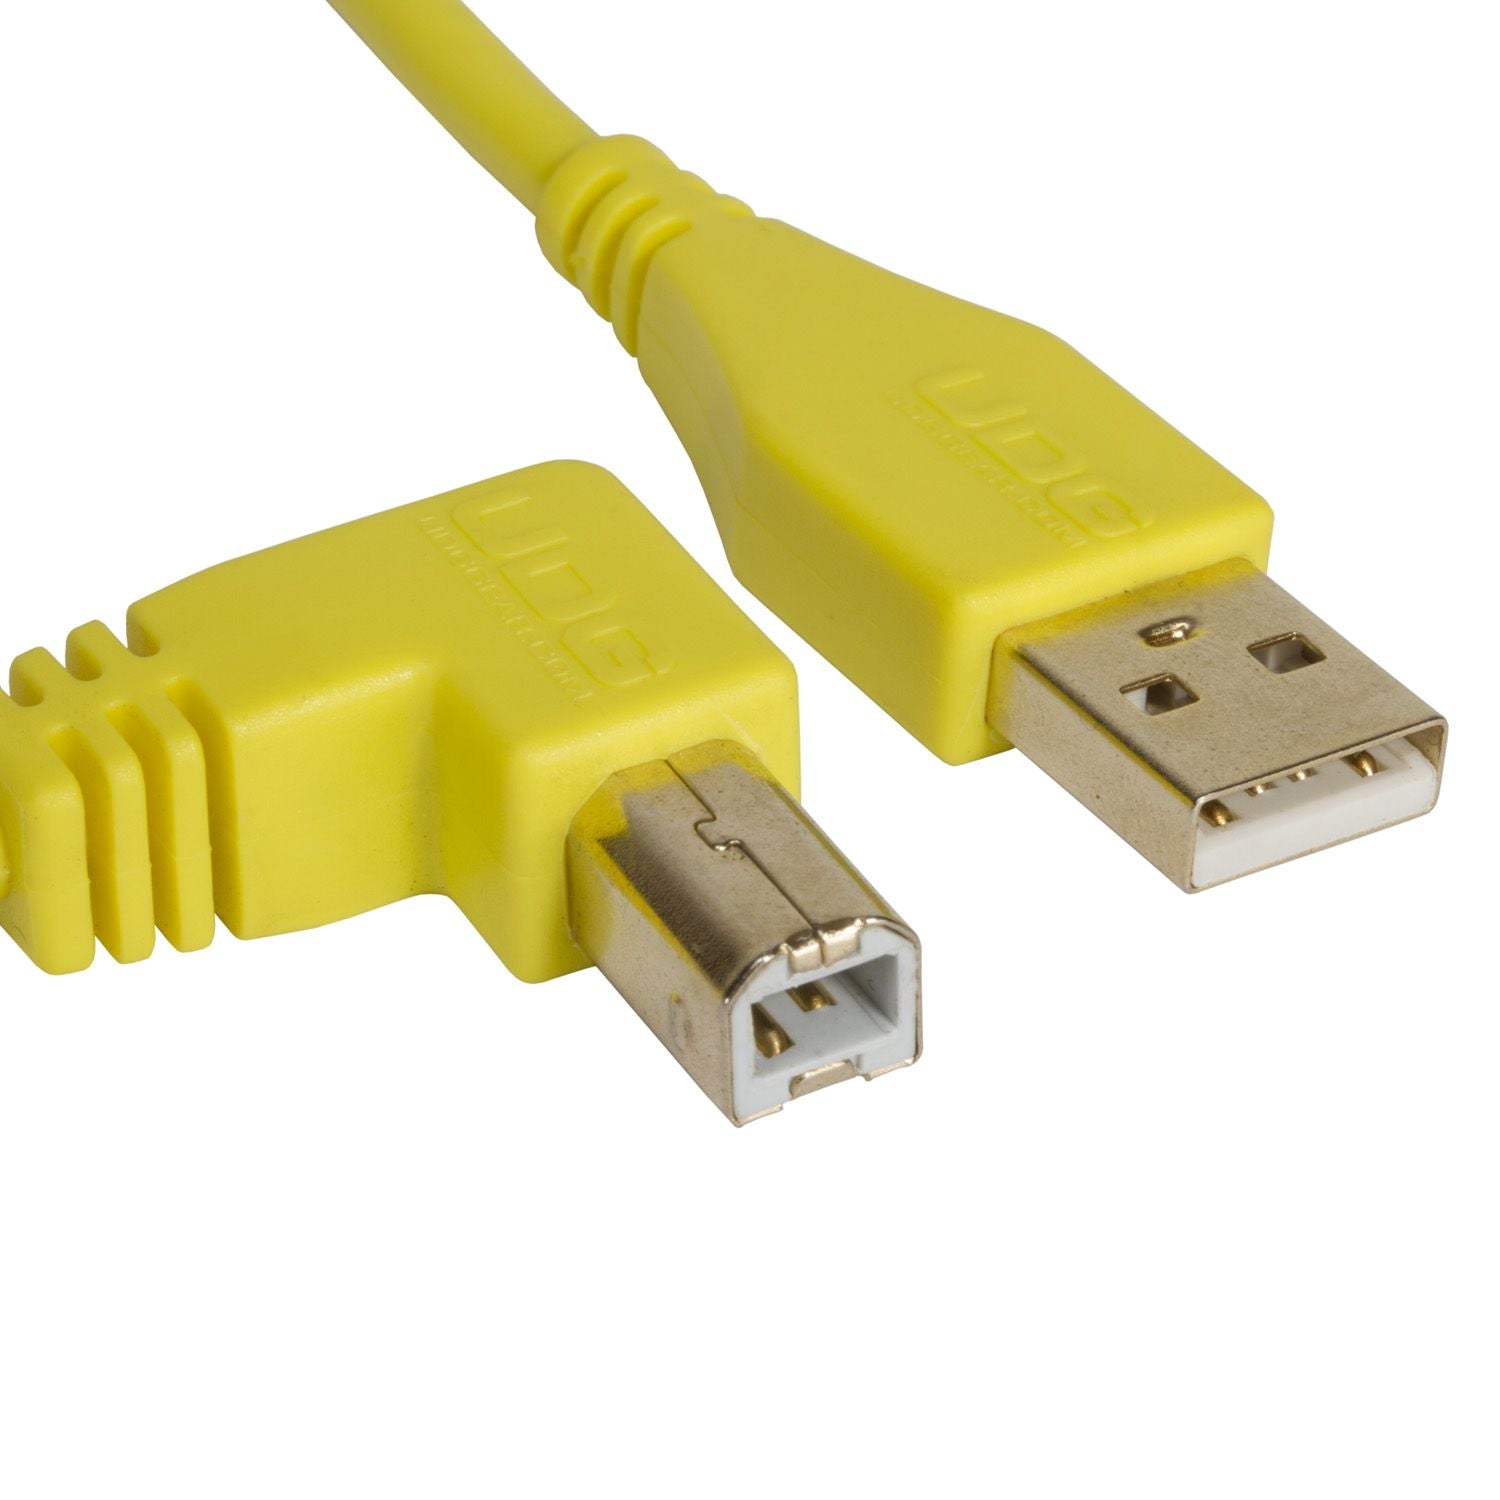 UDG Ultimate Audio Cable USB 2.0 A-B Yellow Angled 2m